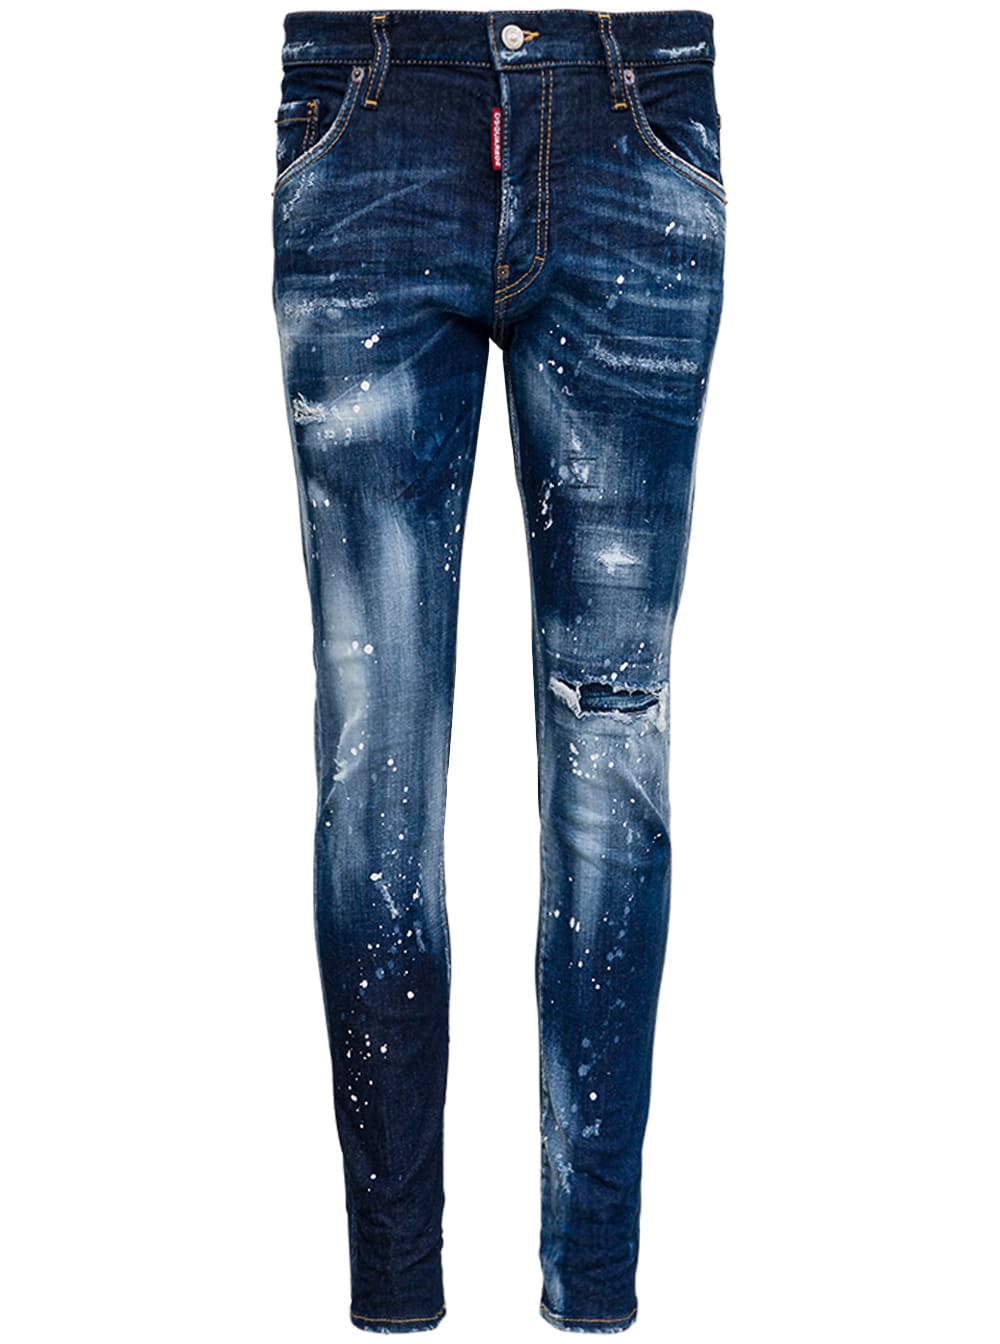 Dsquared2 Denim Jeans With Tears And Color Splash Detail